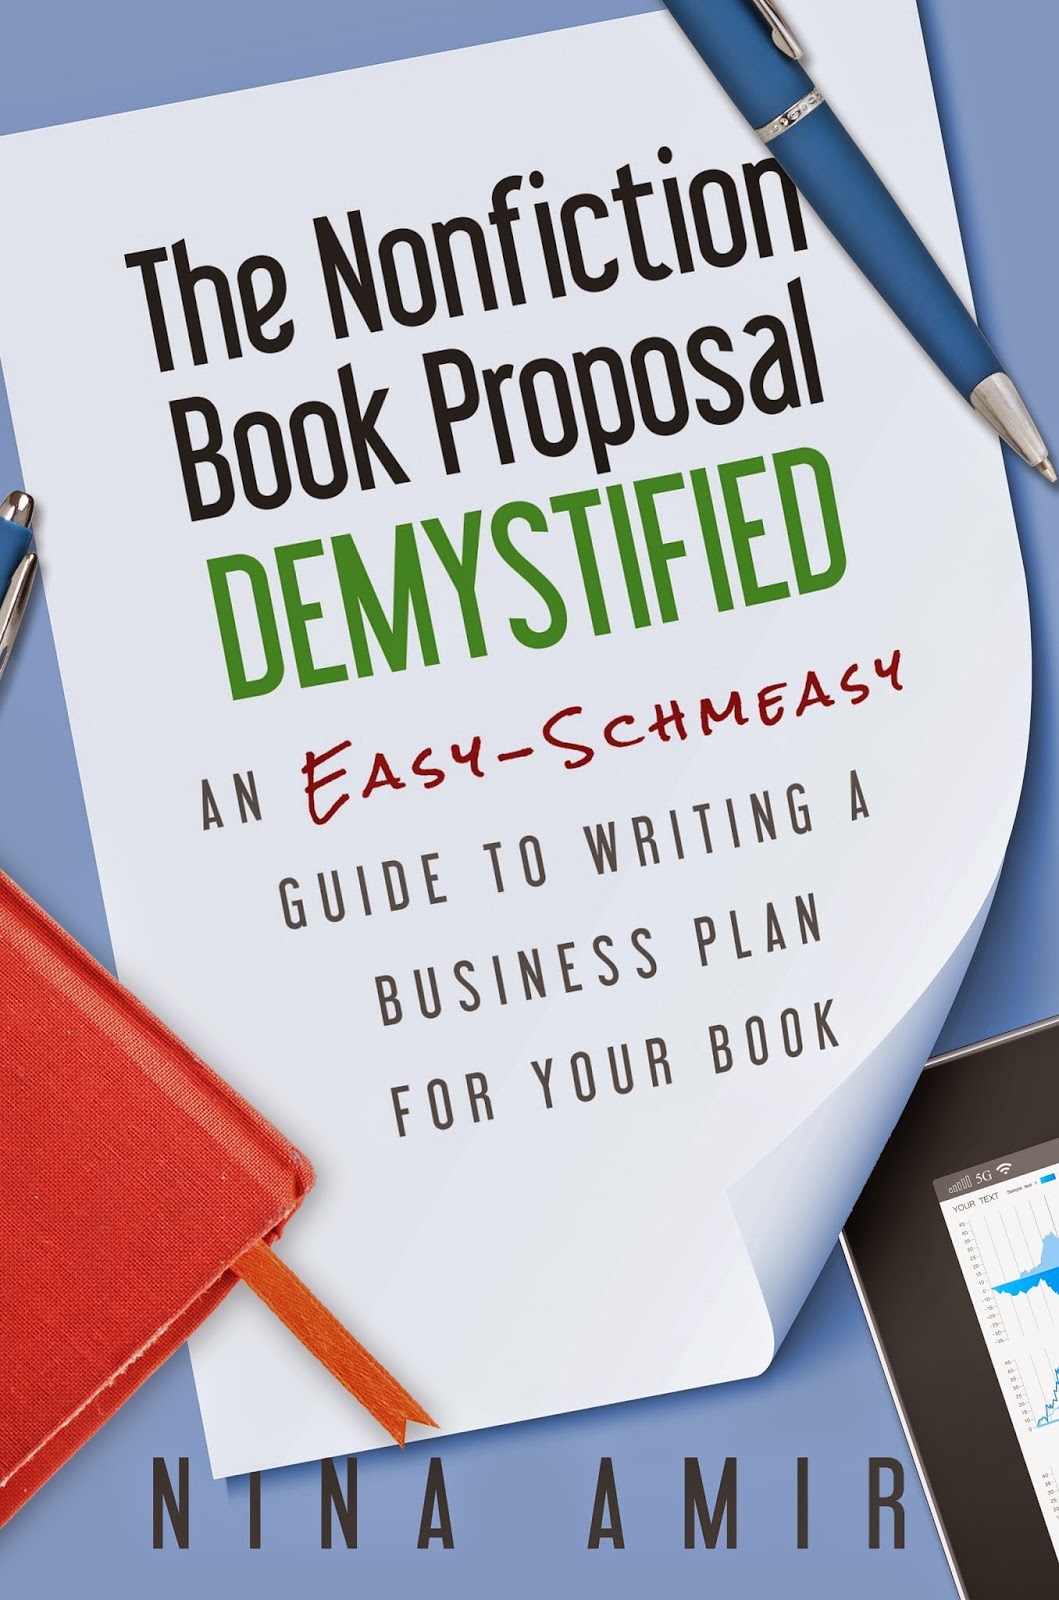 The Nonfiction Book Proposal Demystified: It’s a Business Plan